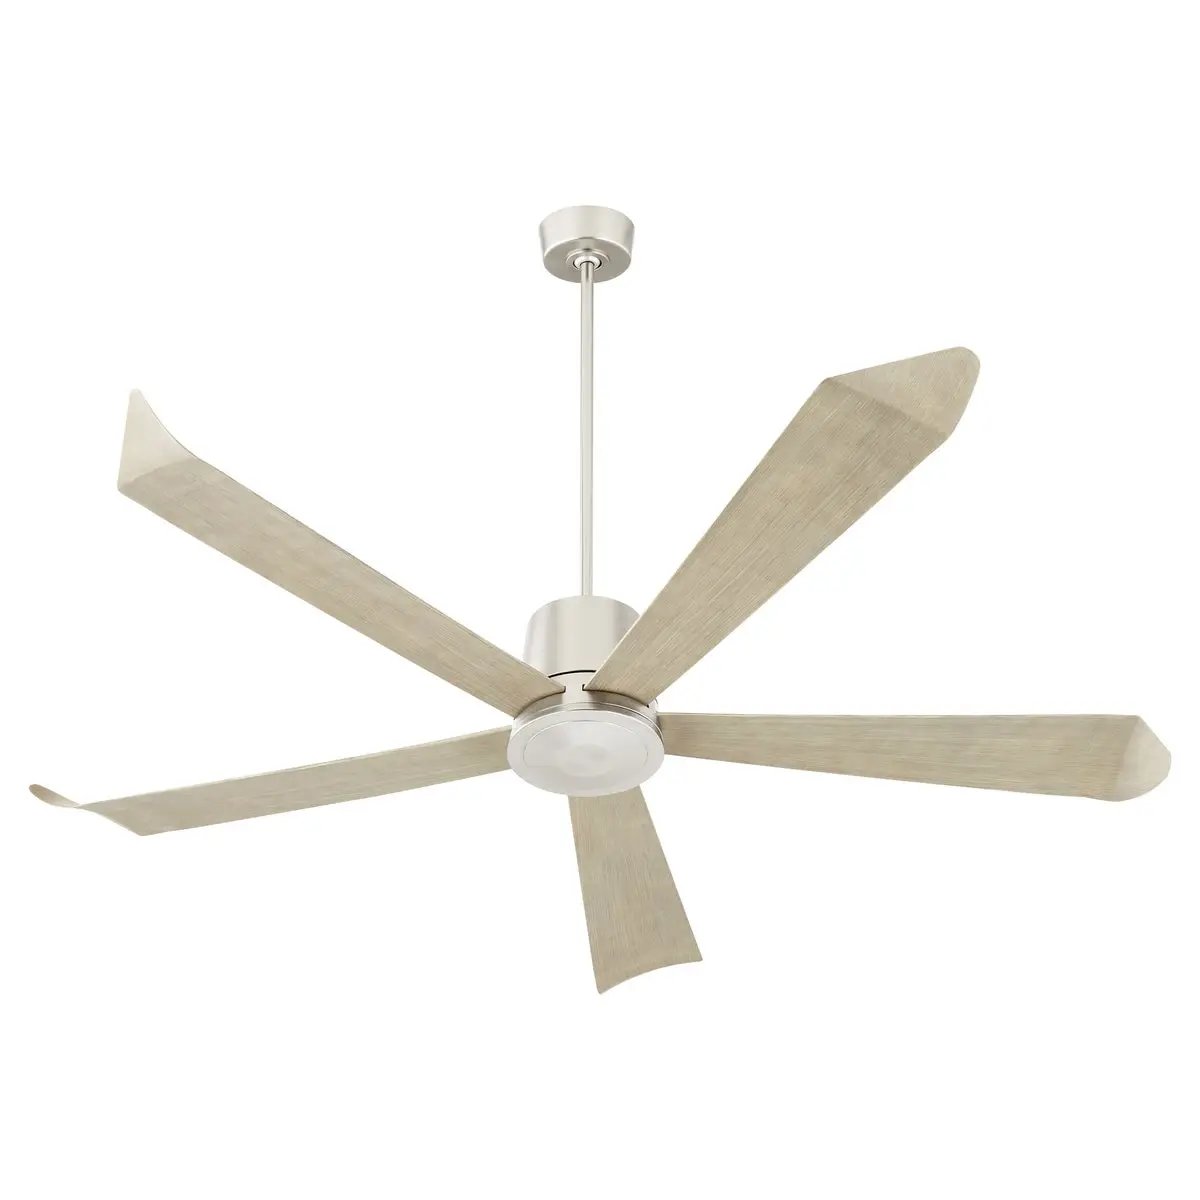 Smart Ceiling Fan with elongated blades and optional light kits. Perfect fit for any setting. Elevate your space with this top-rated fan.